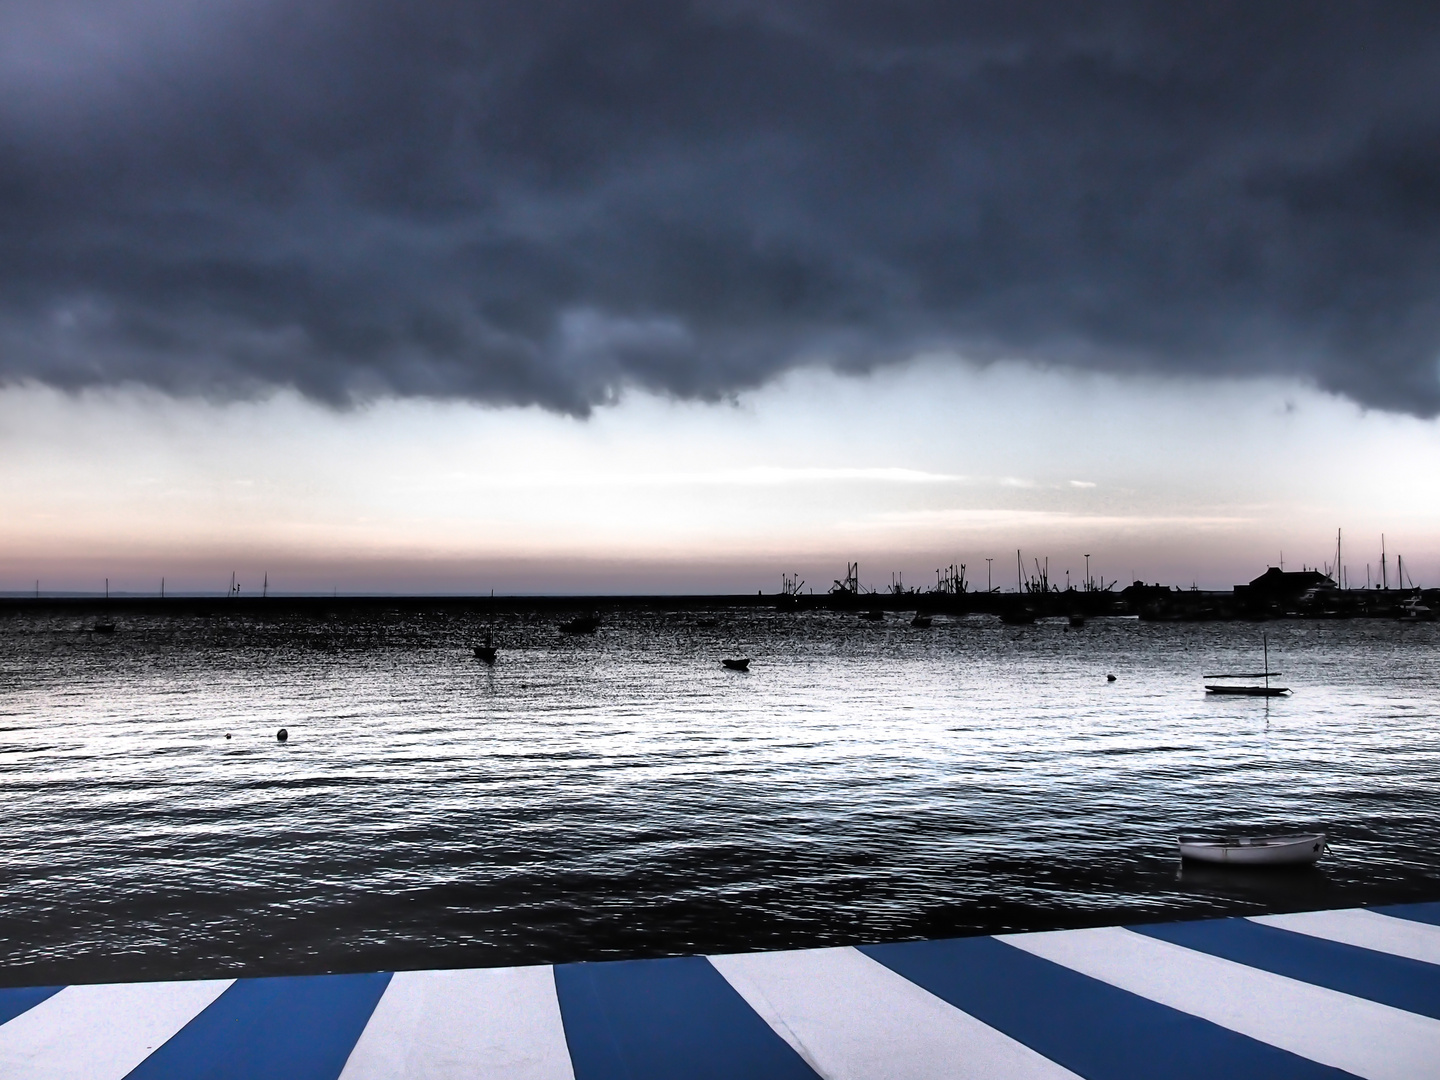 "Storm over Provincetown"